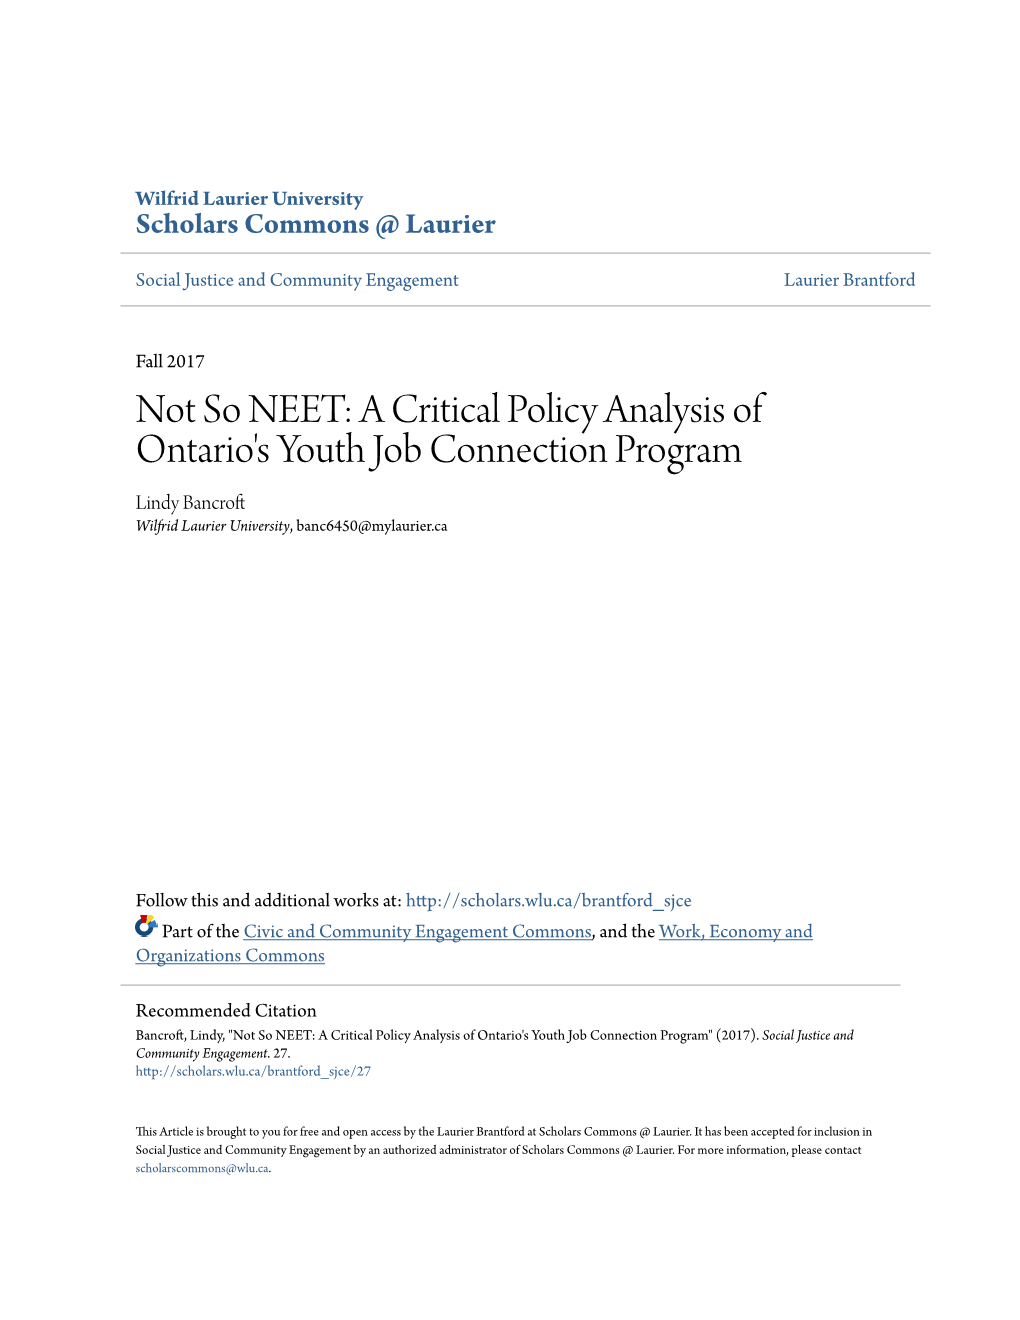 Not So NEET: a Critical Policy Analysis of Ontario's Youth Job Connection Program Lindy Bancroft Wilfrid Laurier University, Banc6450@Mylaurier.Ca